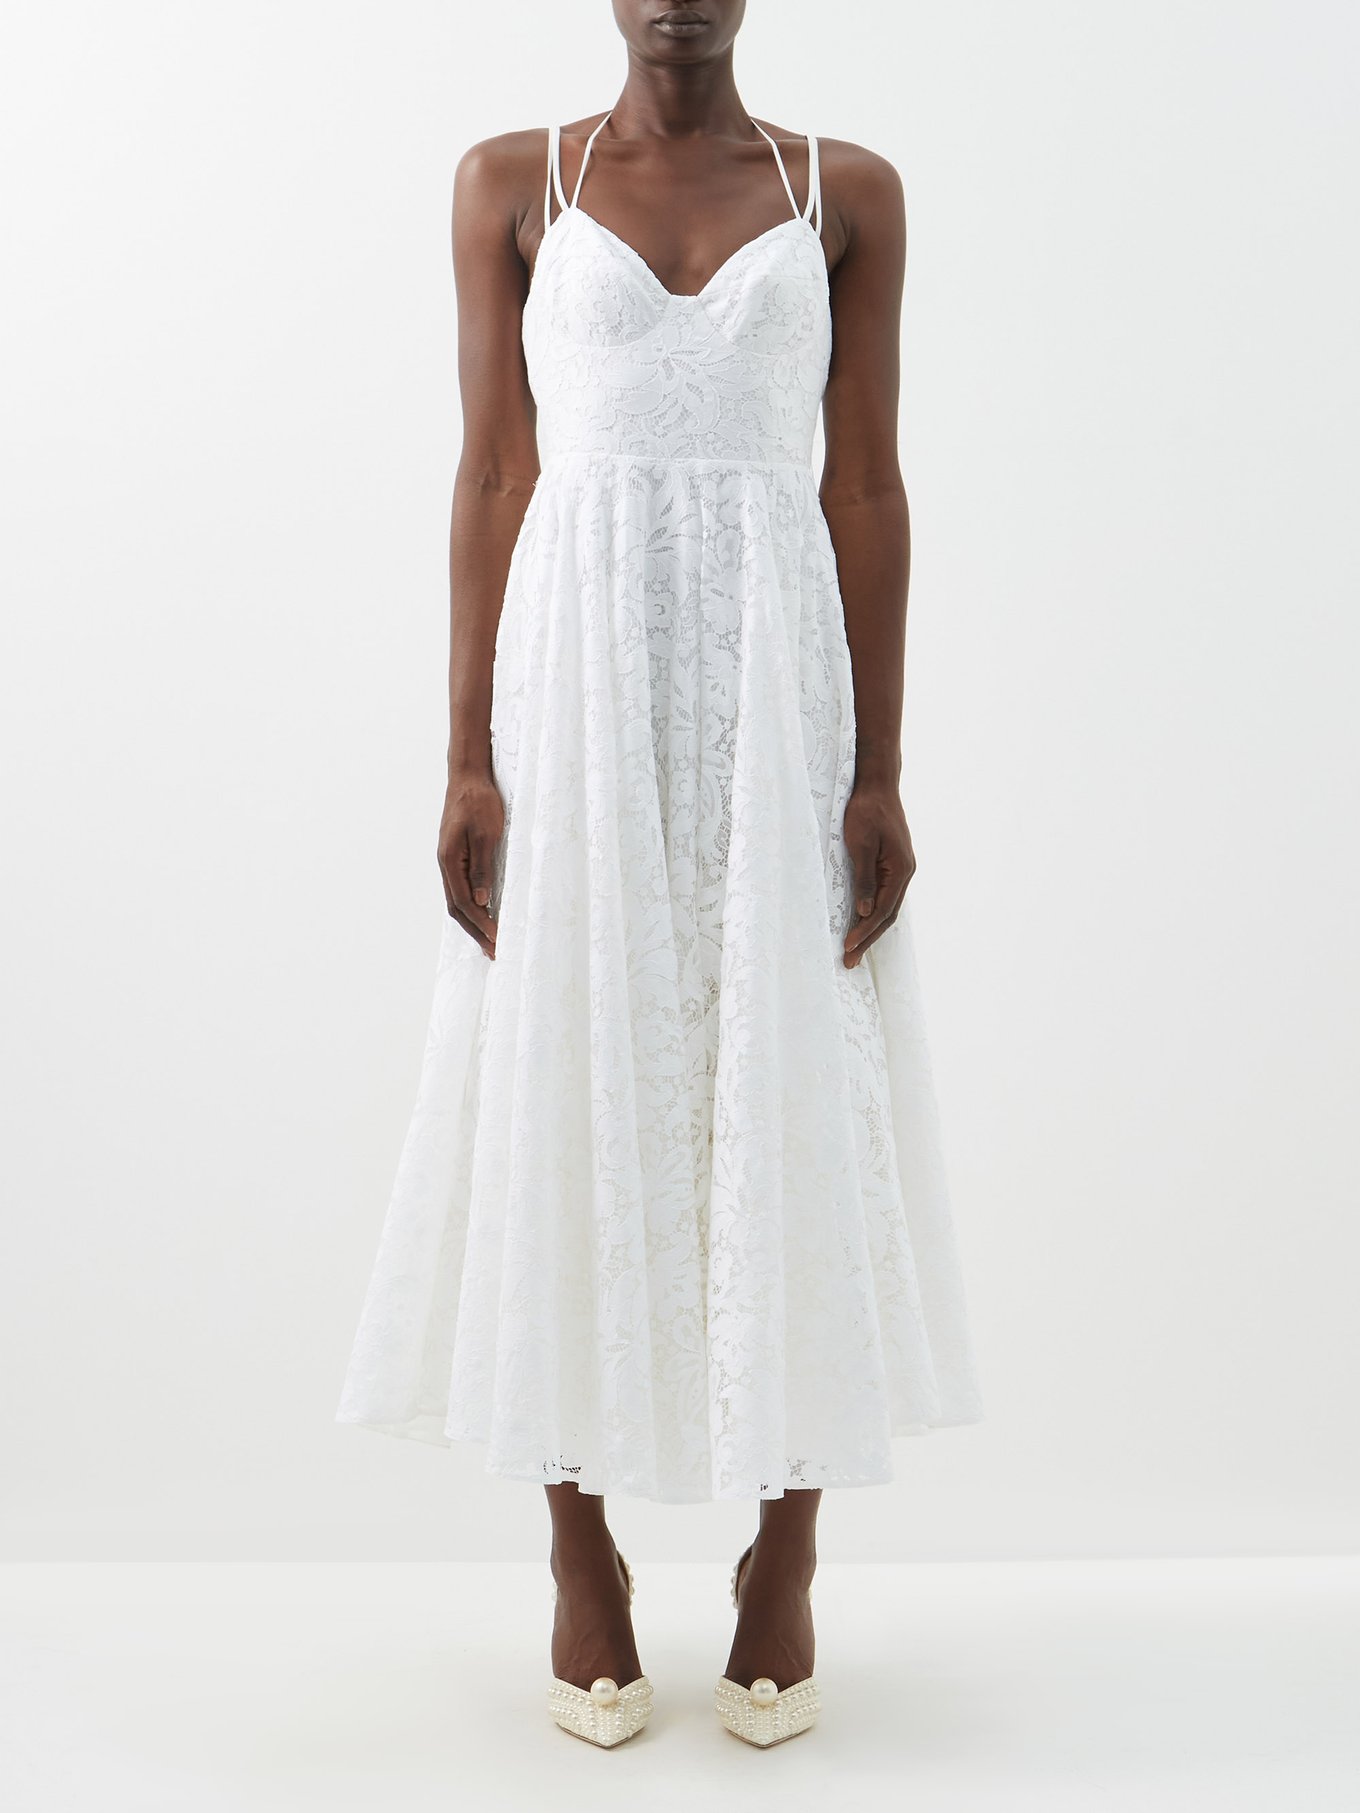 Mabel Dress-White - Twosisters The Label US